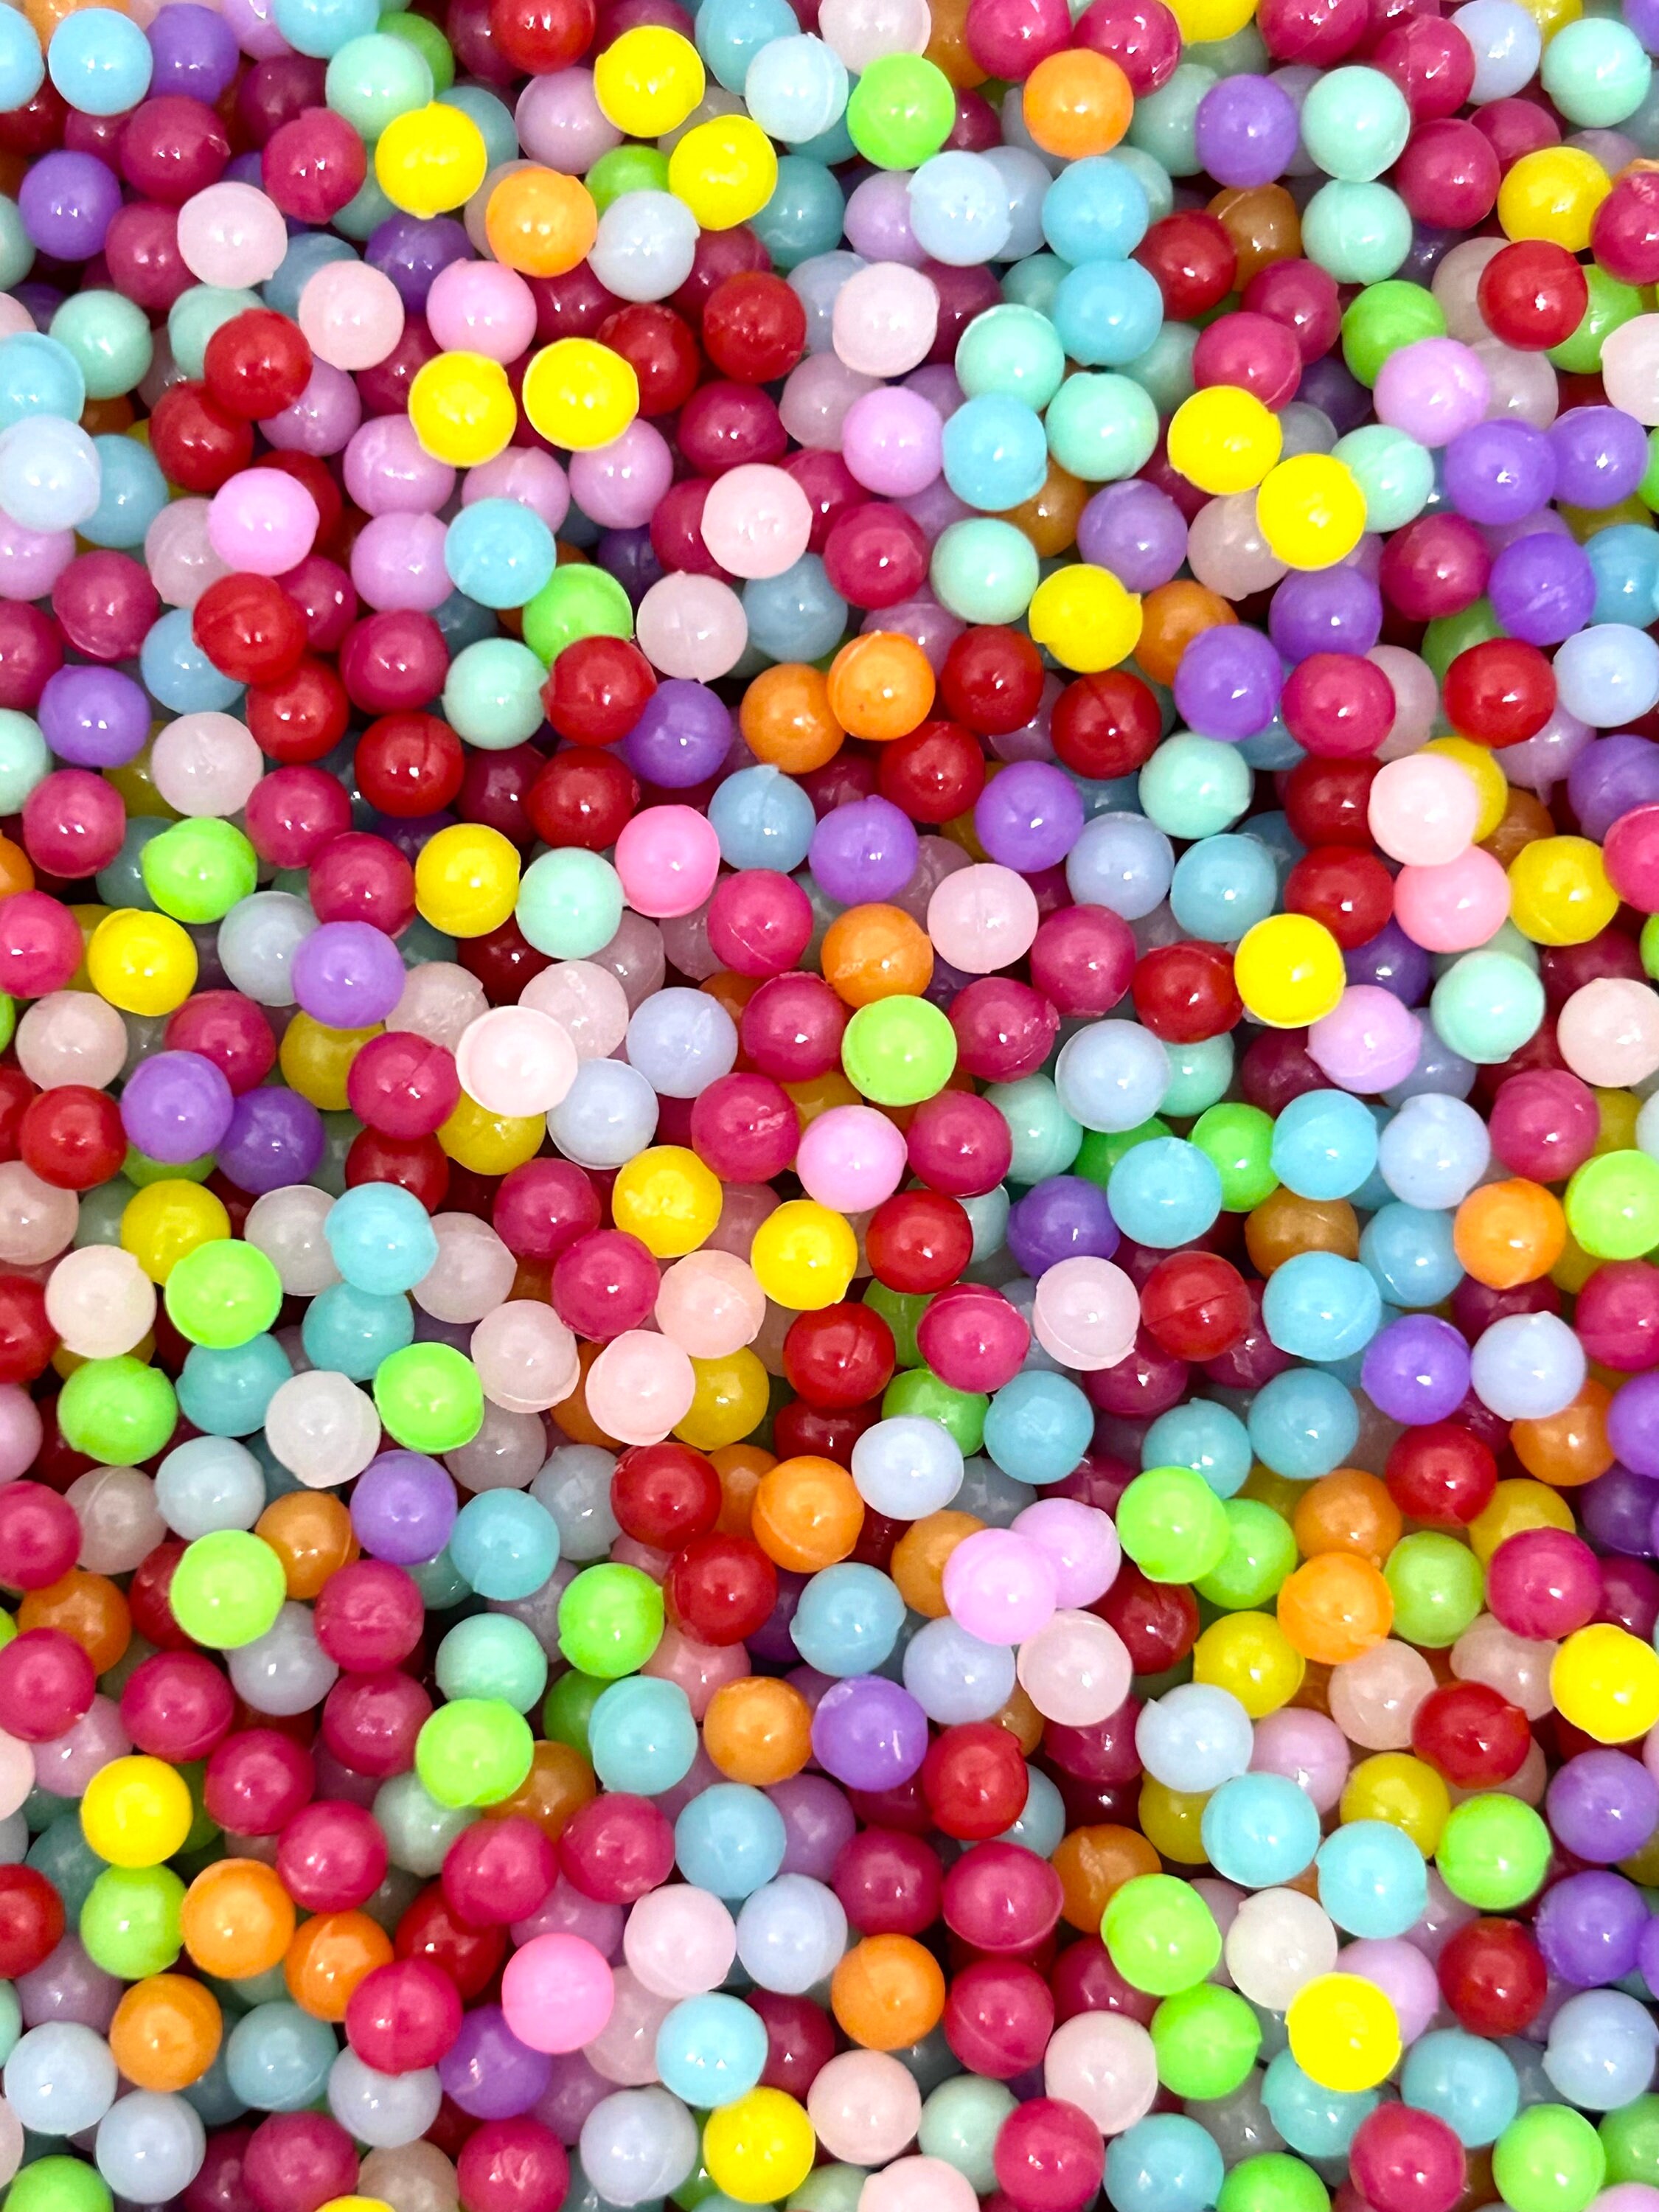 Colored Foam Fake Sprinkles, Colorful Fake Sprinkles, Mini Rainbow Foam  Ball Beads for Slime, Faux Nonpareils, Miniature Bubblegum Candy